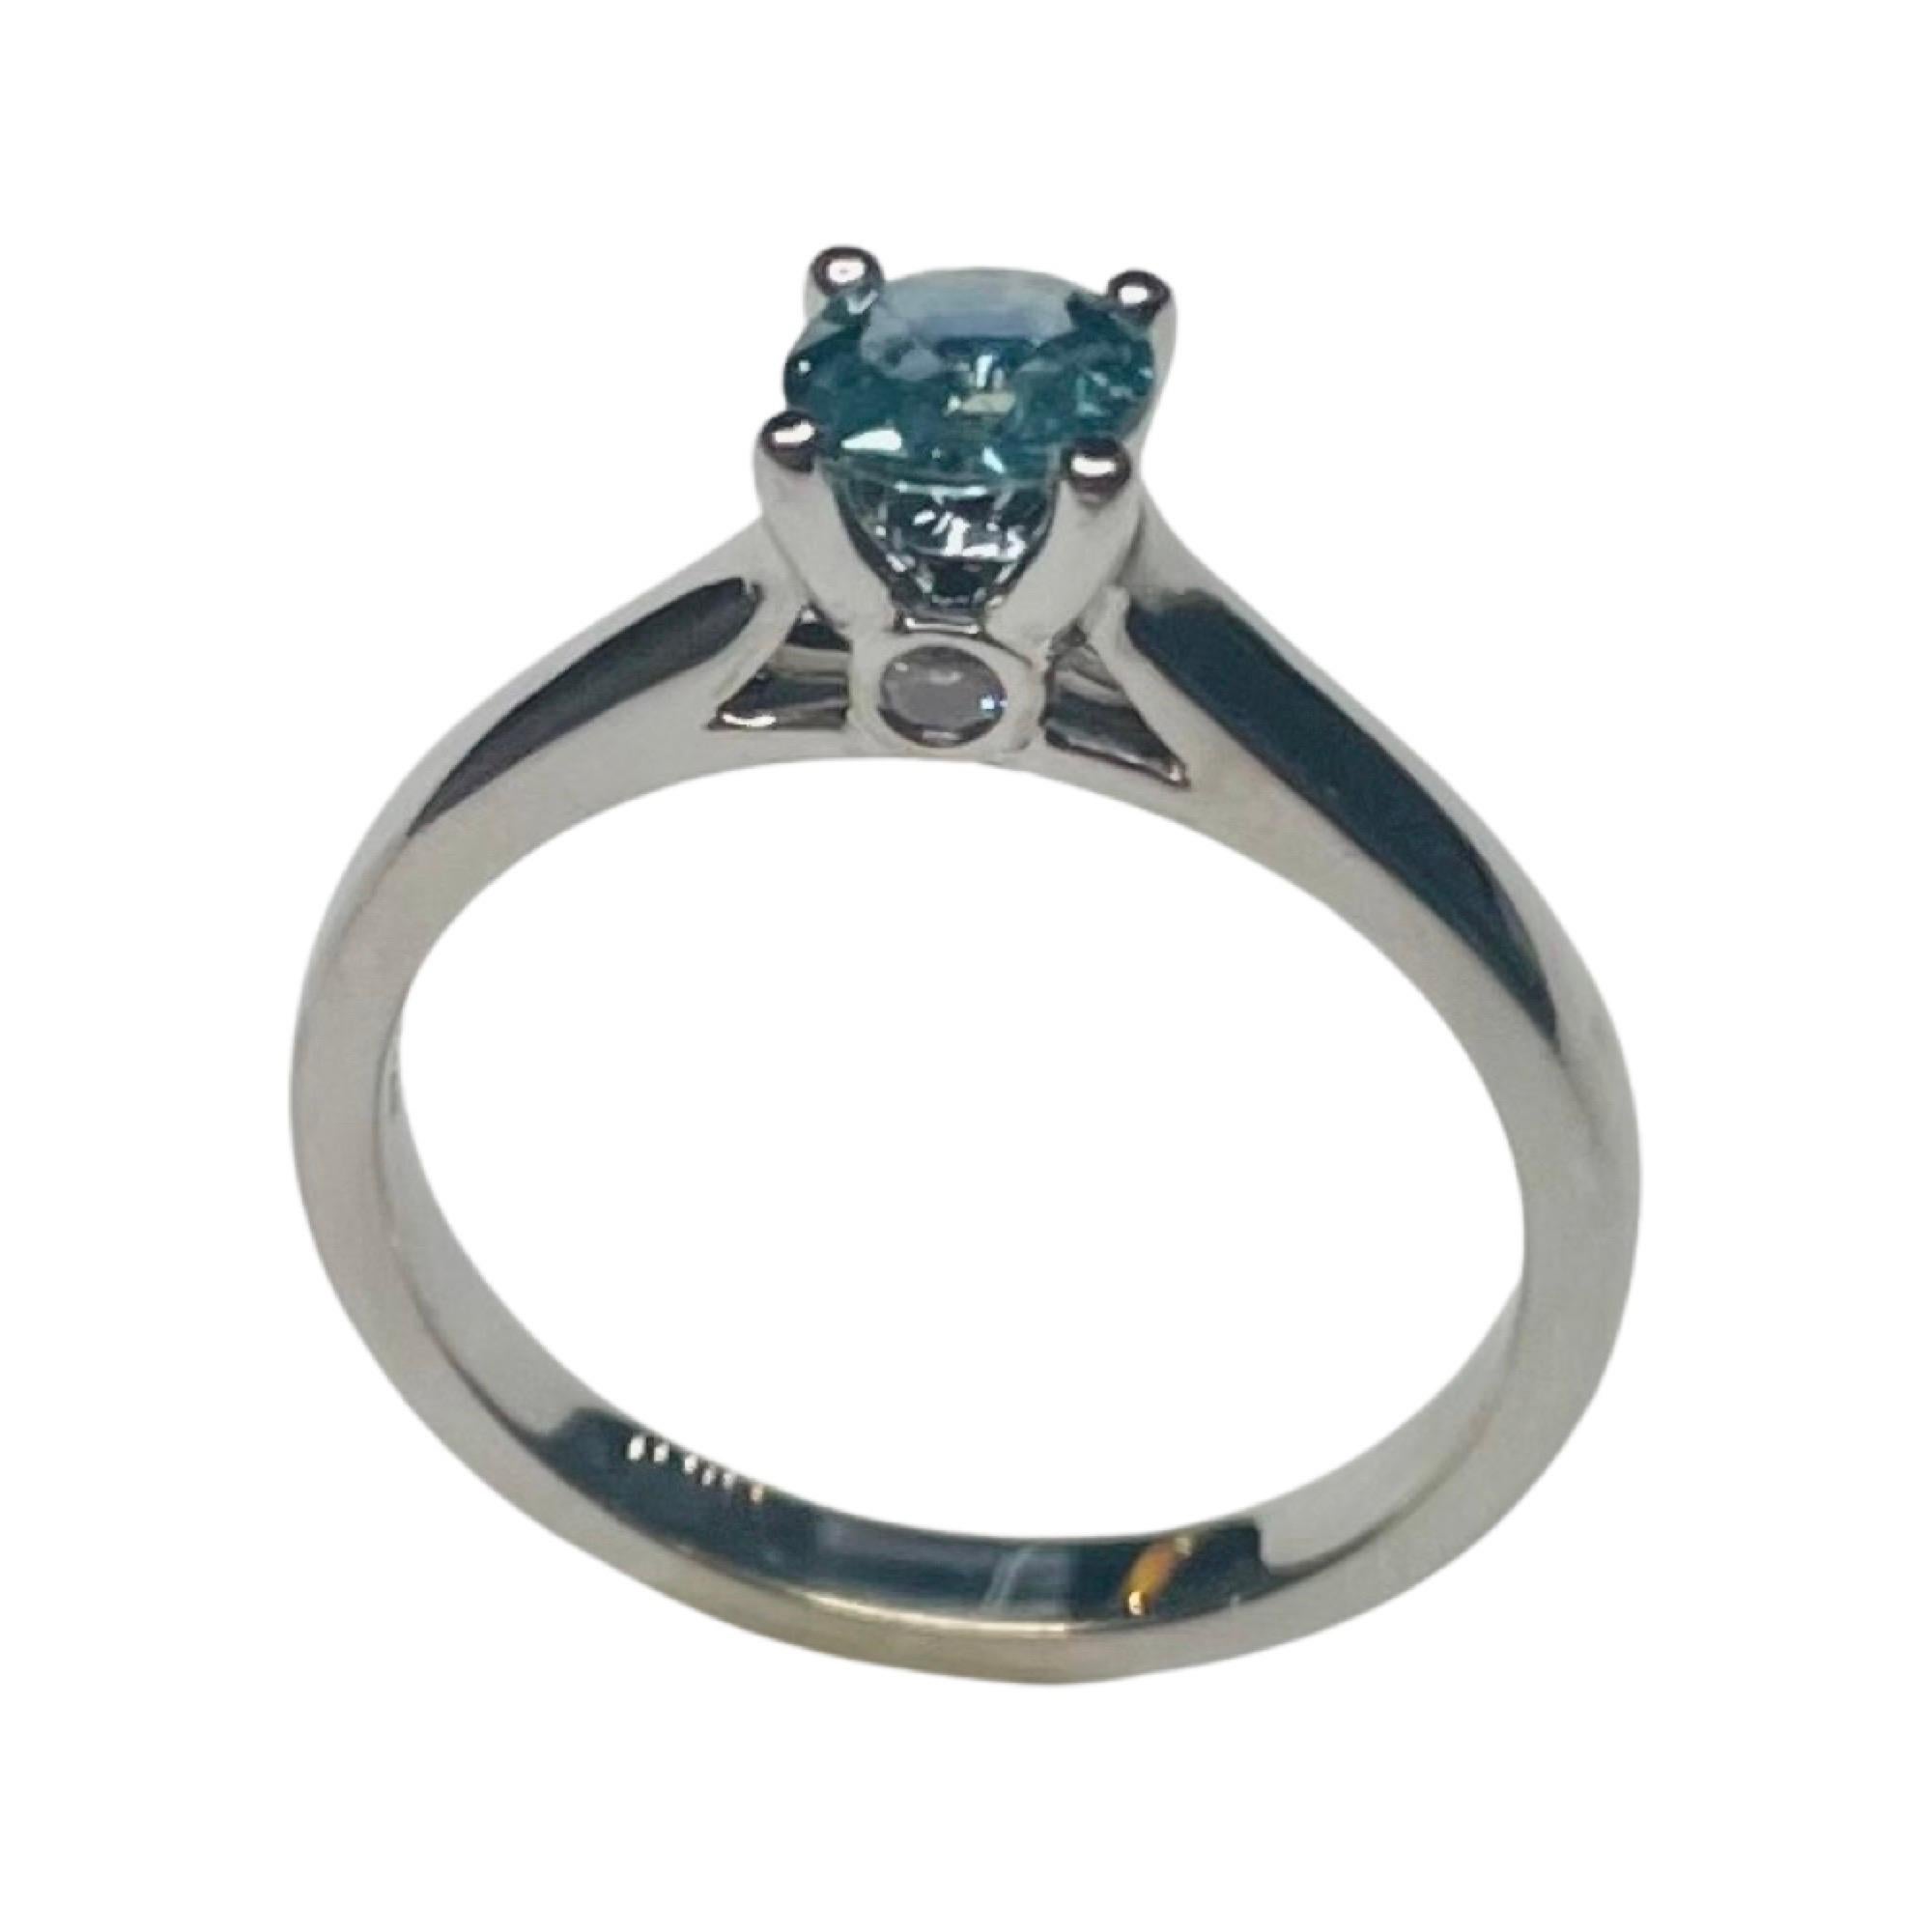 Lithos 14K White Gold Montana Sapphire and Diamond Ring. The prong set center Montana sapphire is 0.50 carats. There are 2 full cut round brilliant diamonds bezel set on each side of the center head. They are VS Clarity and G color. The total